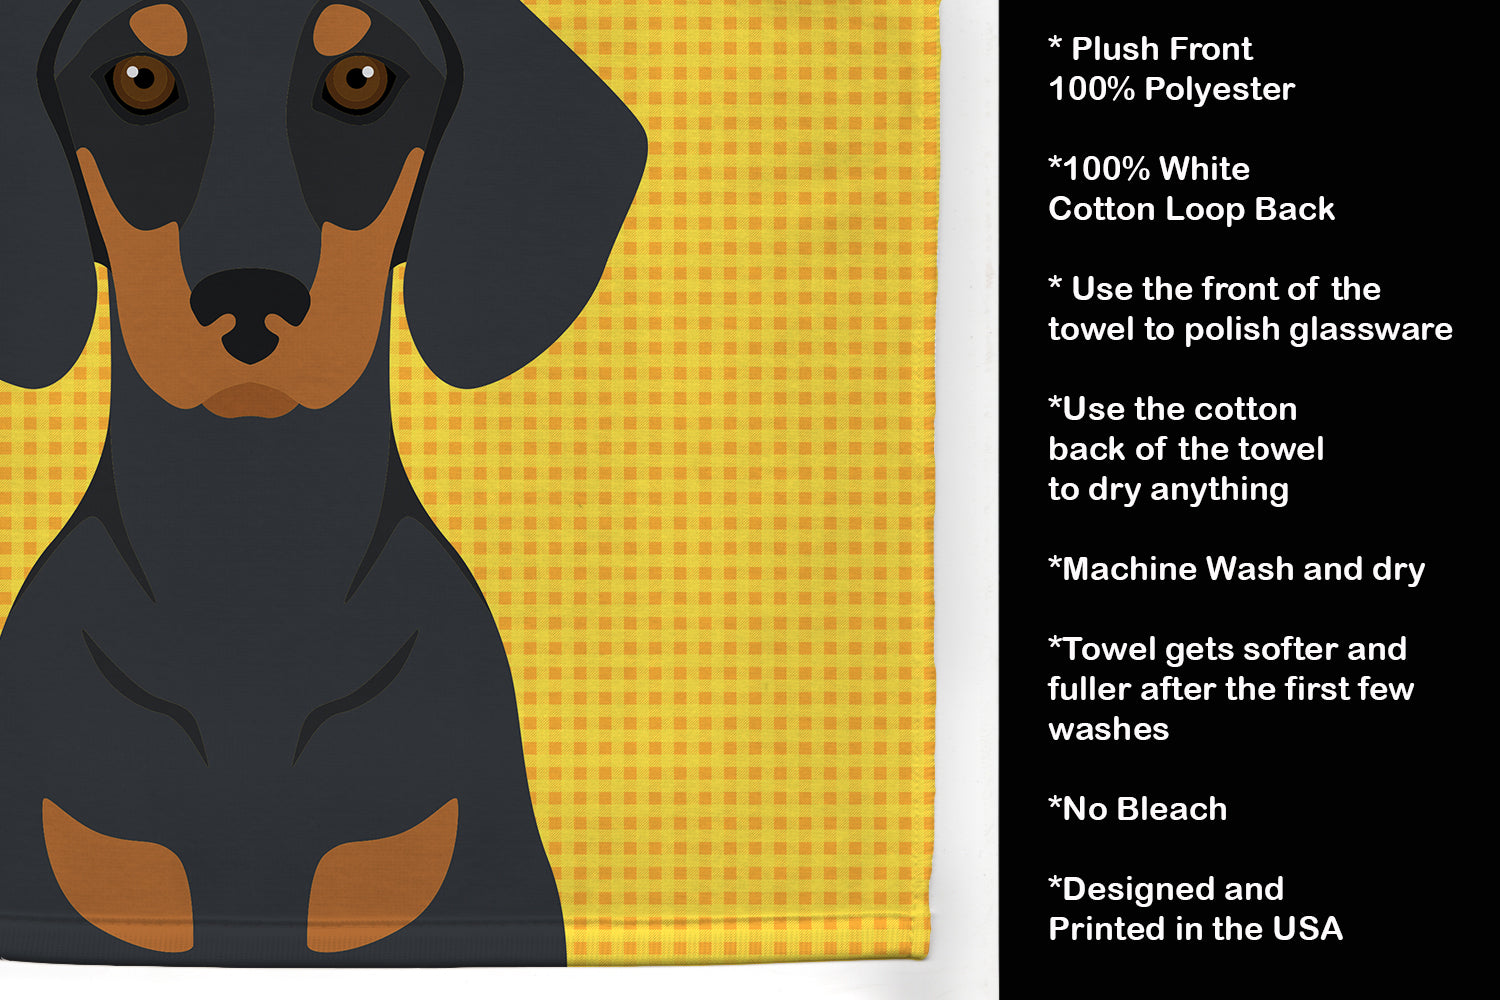 Summer Sunflowers Black and Tan Dachshund Kitchen Towel - the-store.com